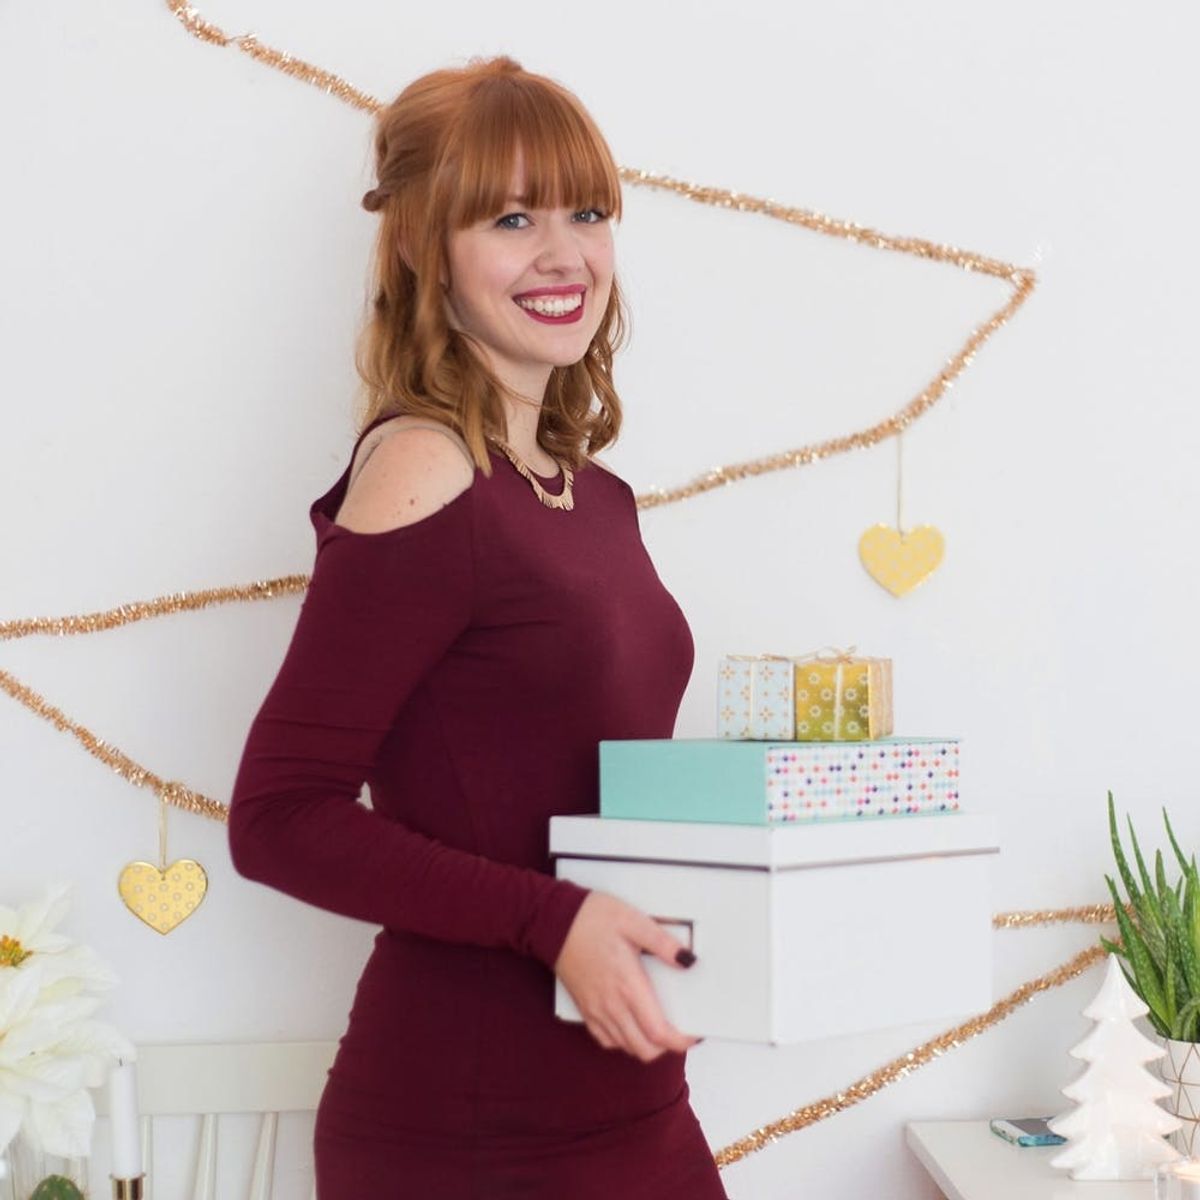 DIY This Festive Cold Shoulders Dress in Less Than 15 Minutes